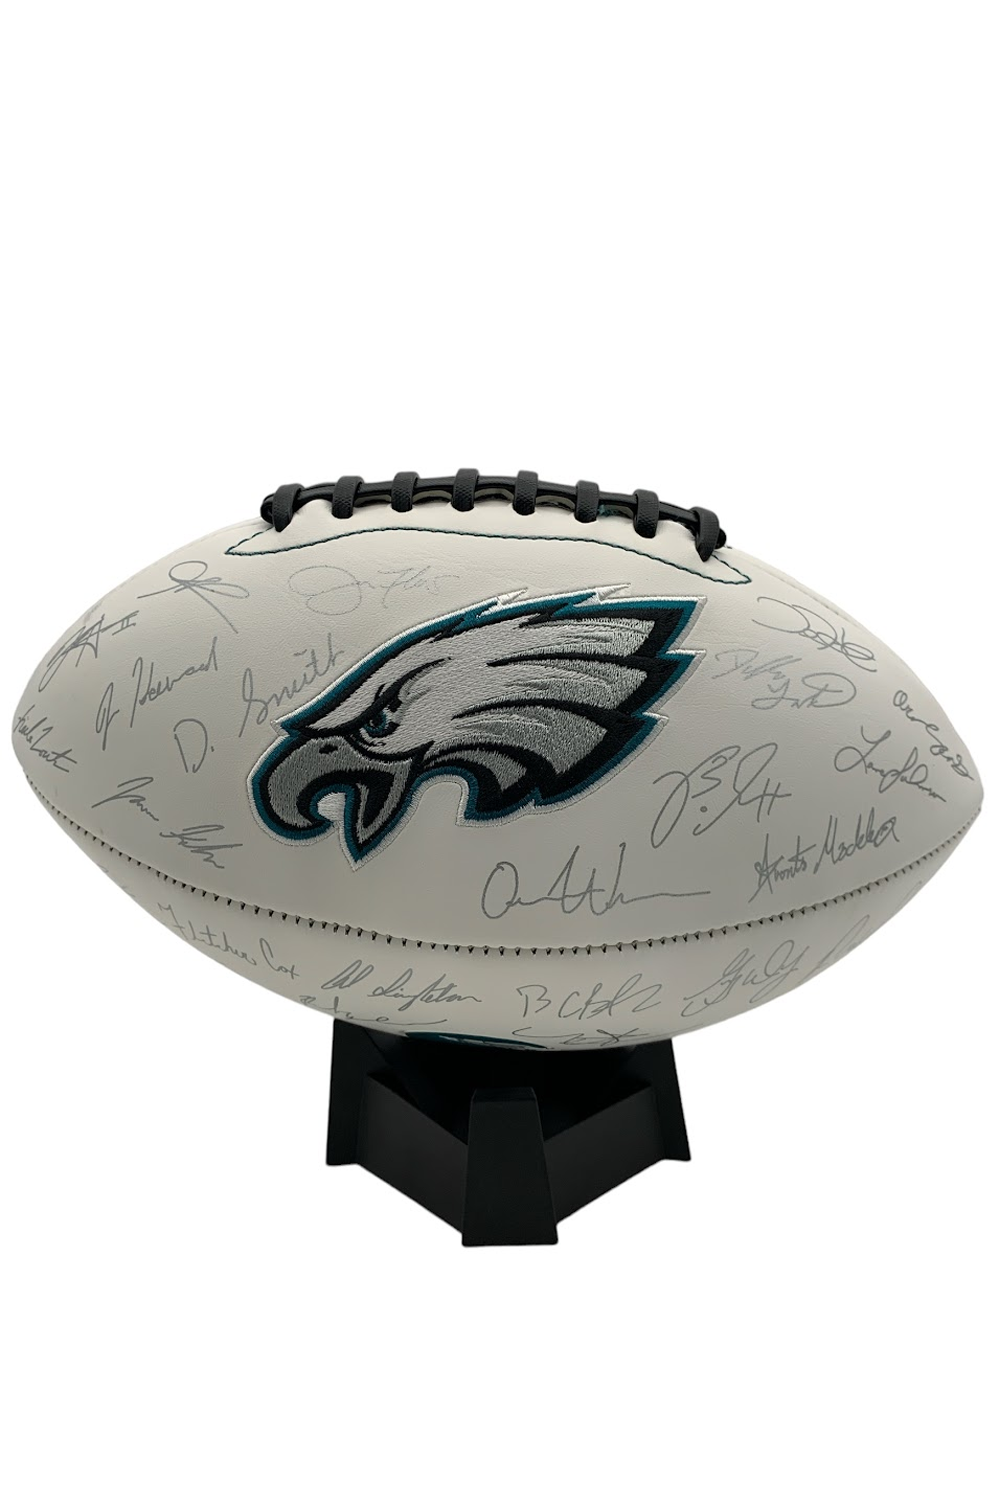 NFL 2021 Special Edition Team Roster Signature Ball with Stand